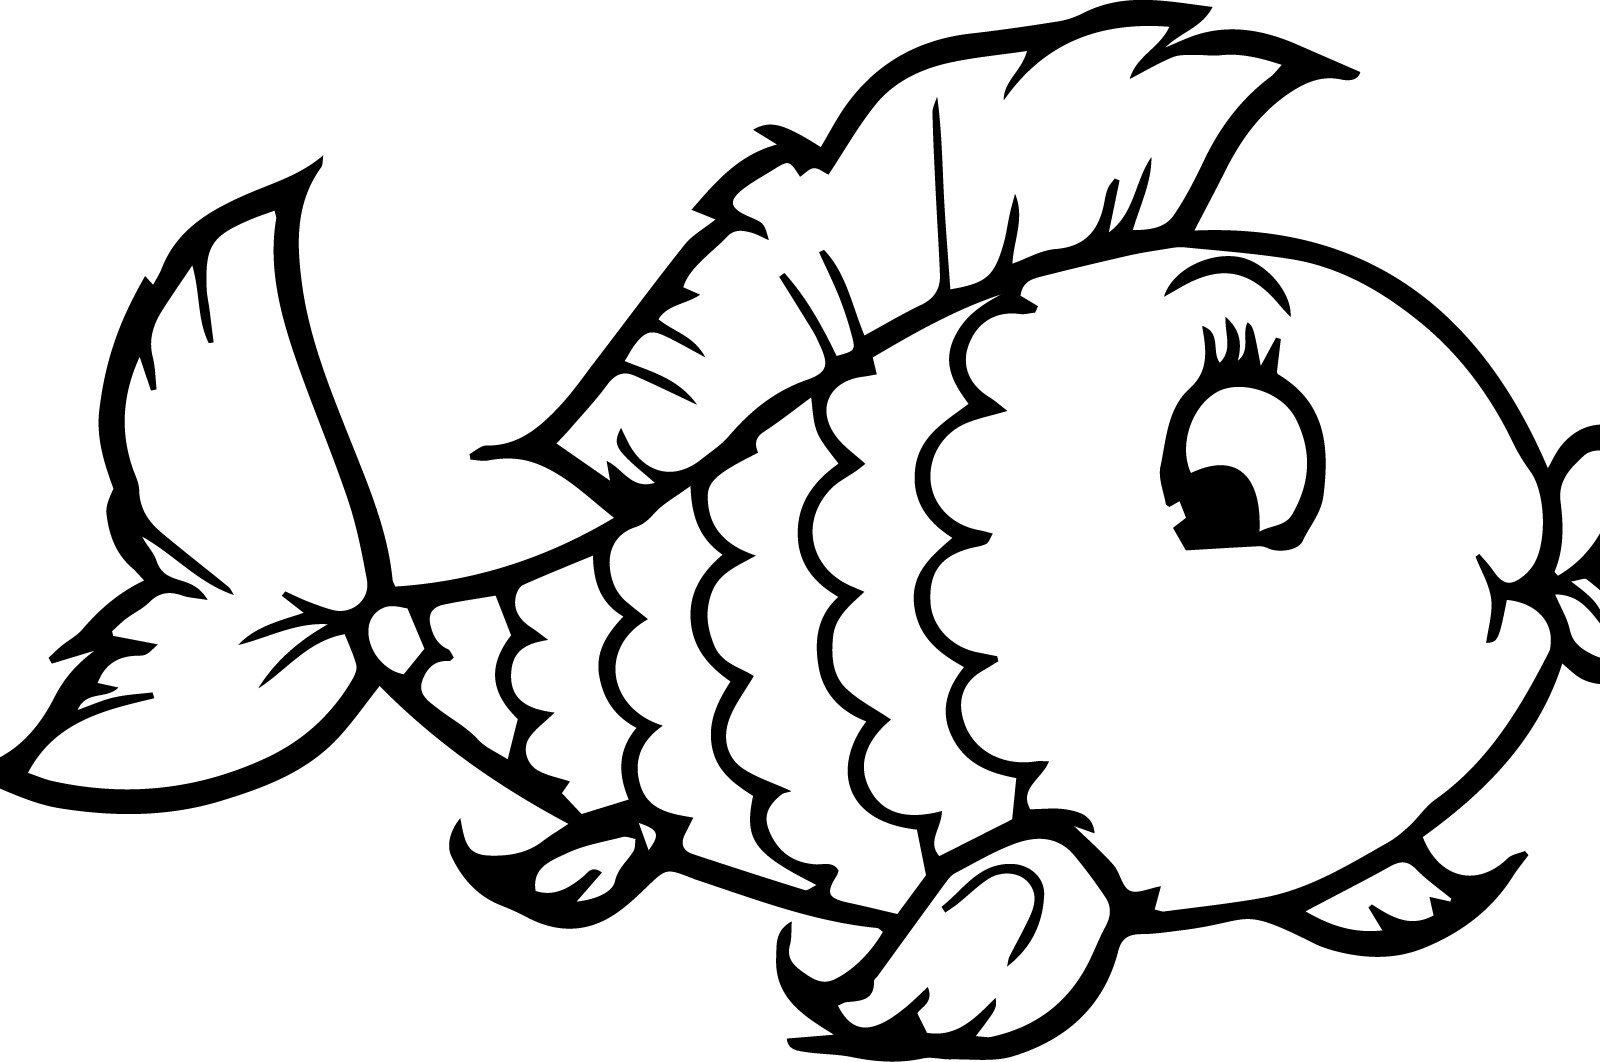 Fish Coloring Pages For Preschool at GetDrawings | Free download